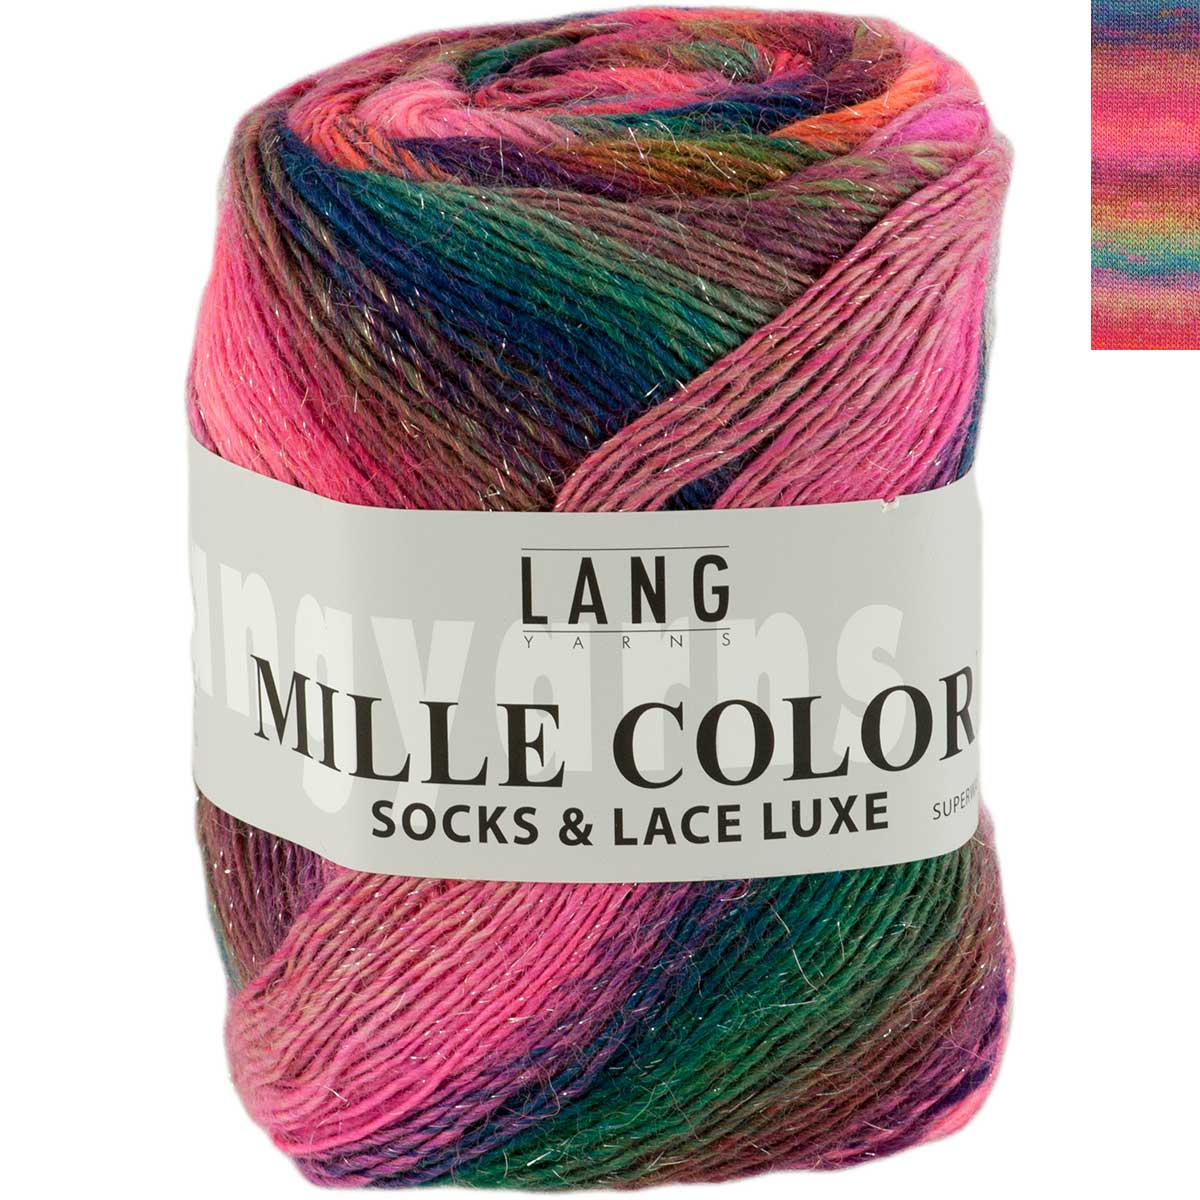 Lang Yarns Mille Colori Socks & Lace Luxe Farbe 50